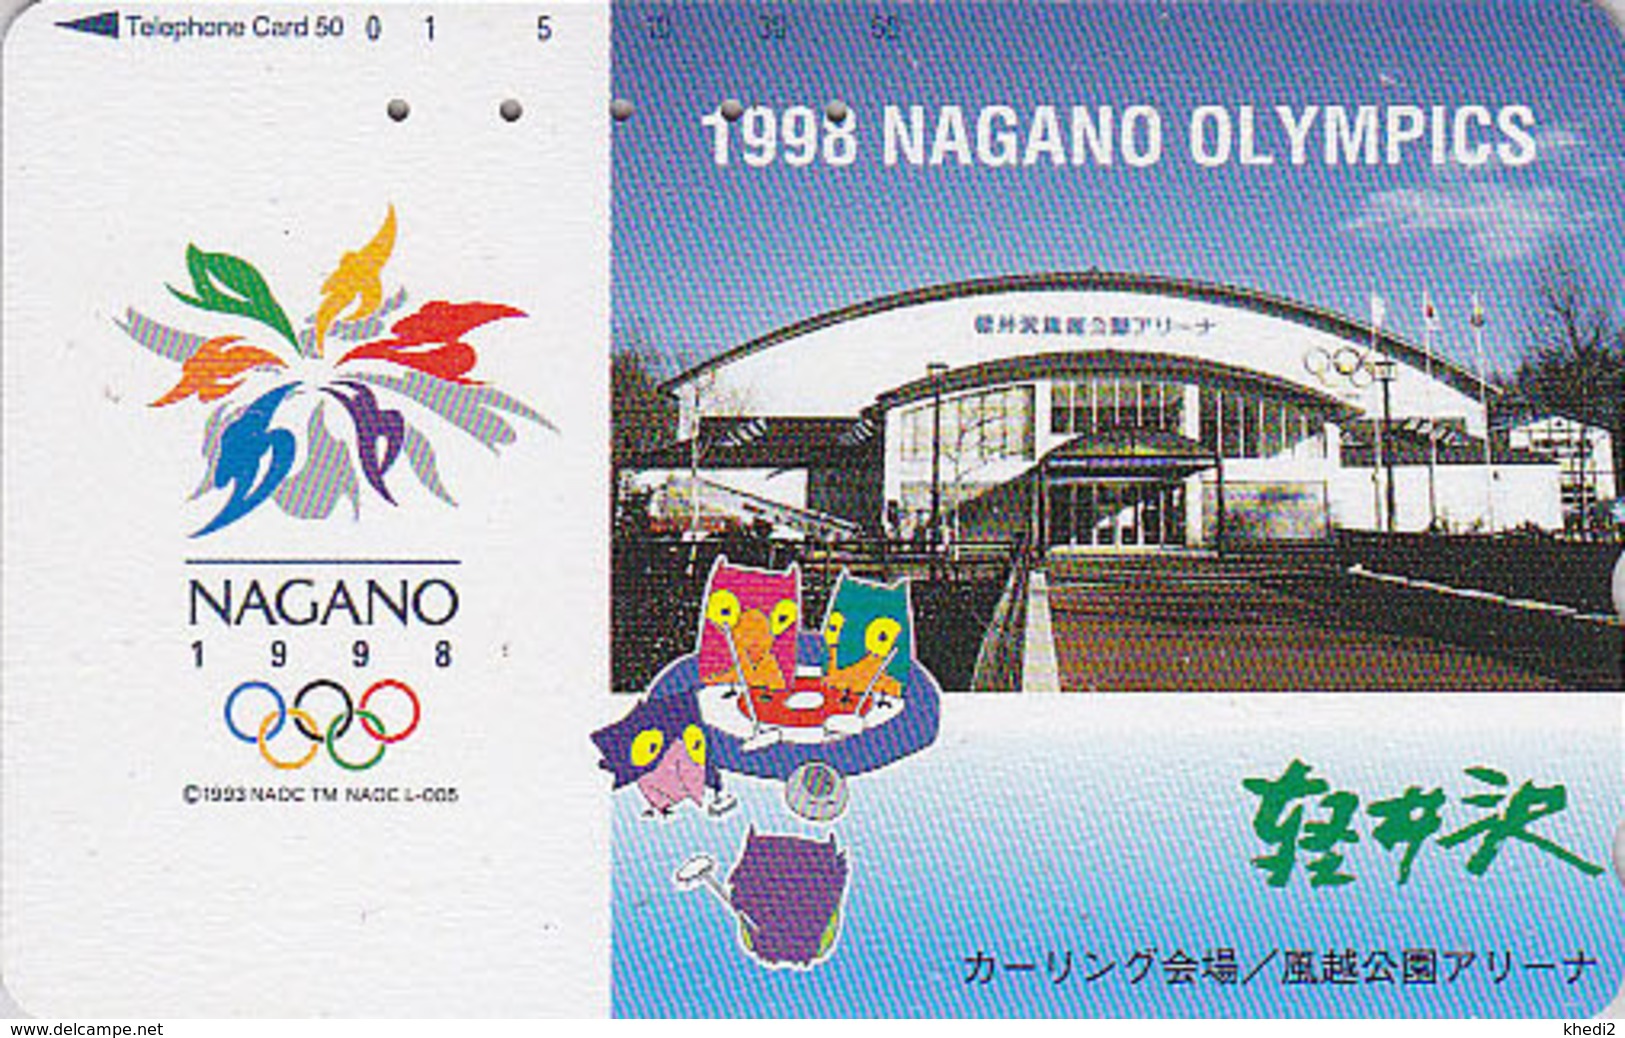 RARE TC JAPON / 270-004238 - Animal HIBOU Jeux Olympiques NAGANO / CURLING - OWL Bird OLYMPIC GAMES JAPN Free Pc 3928 - Olympische Spiele